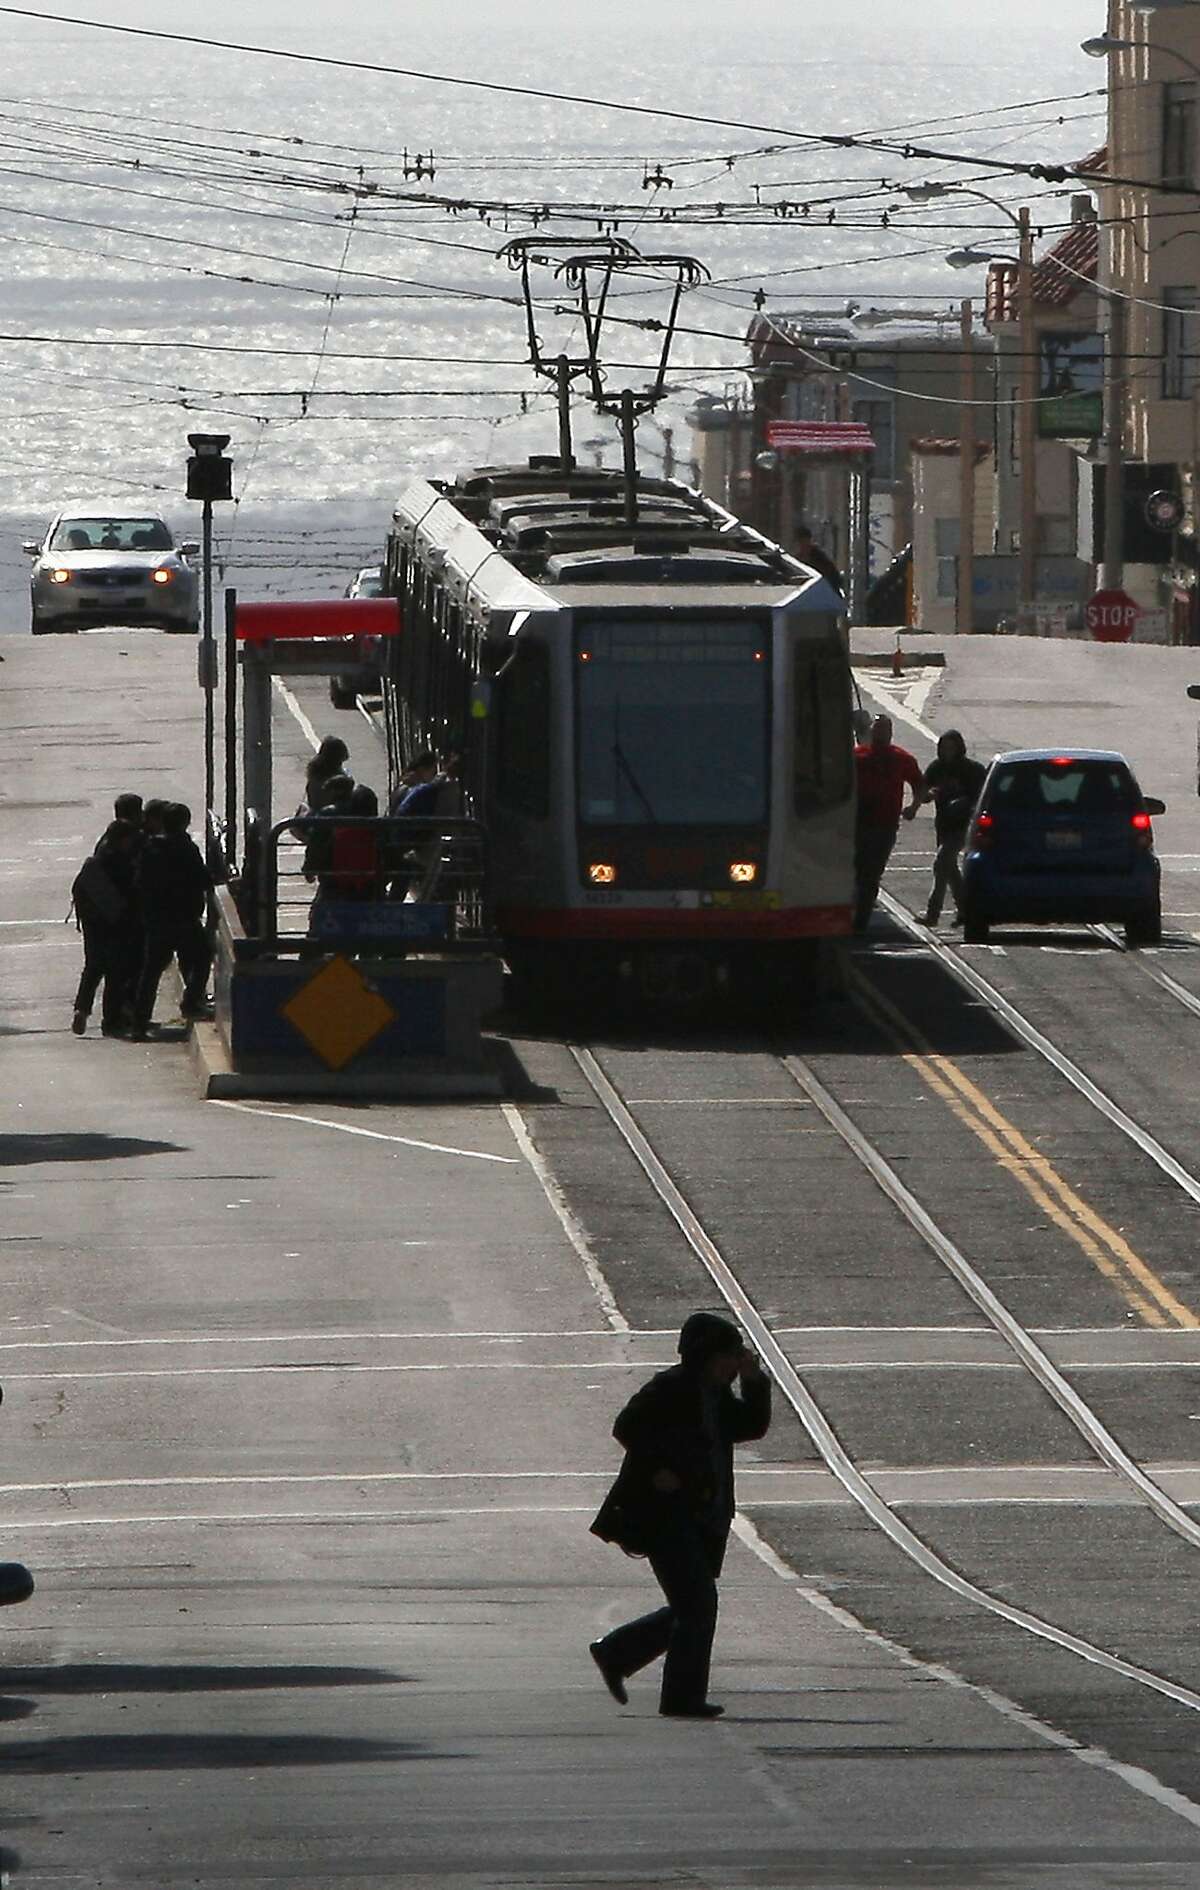 Pedestrians boarding the bus on Taravel St. at 22nd Ave. in San Francisco, Calif., on Friday, April 13, 2012. An SFMTA (San Francisco Municipal Transportation Agency) proposal for free Muni for youth will be considered by the MTA board early next week.